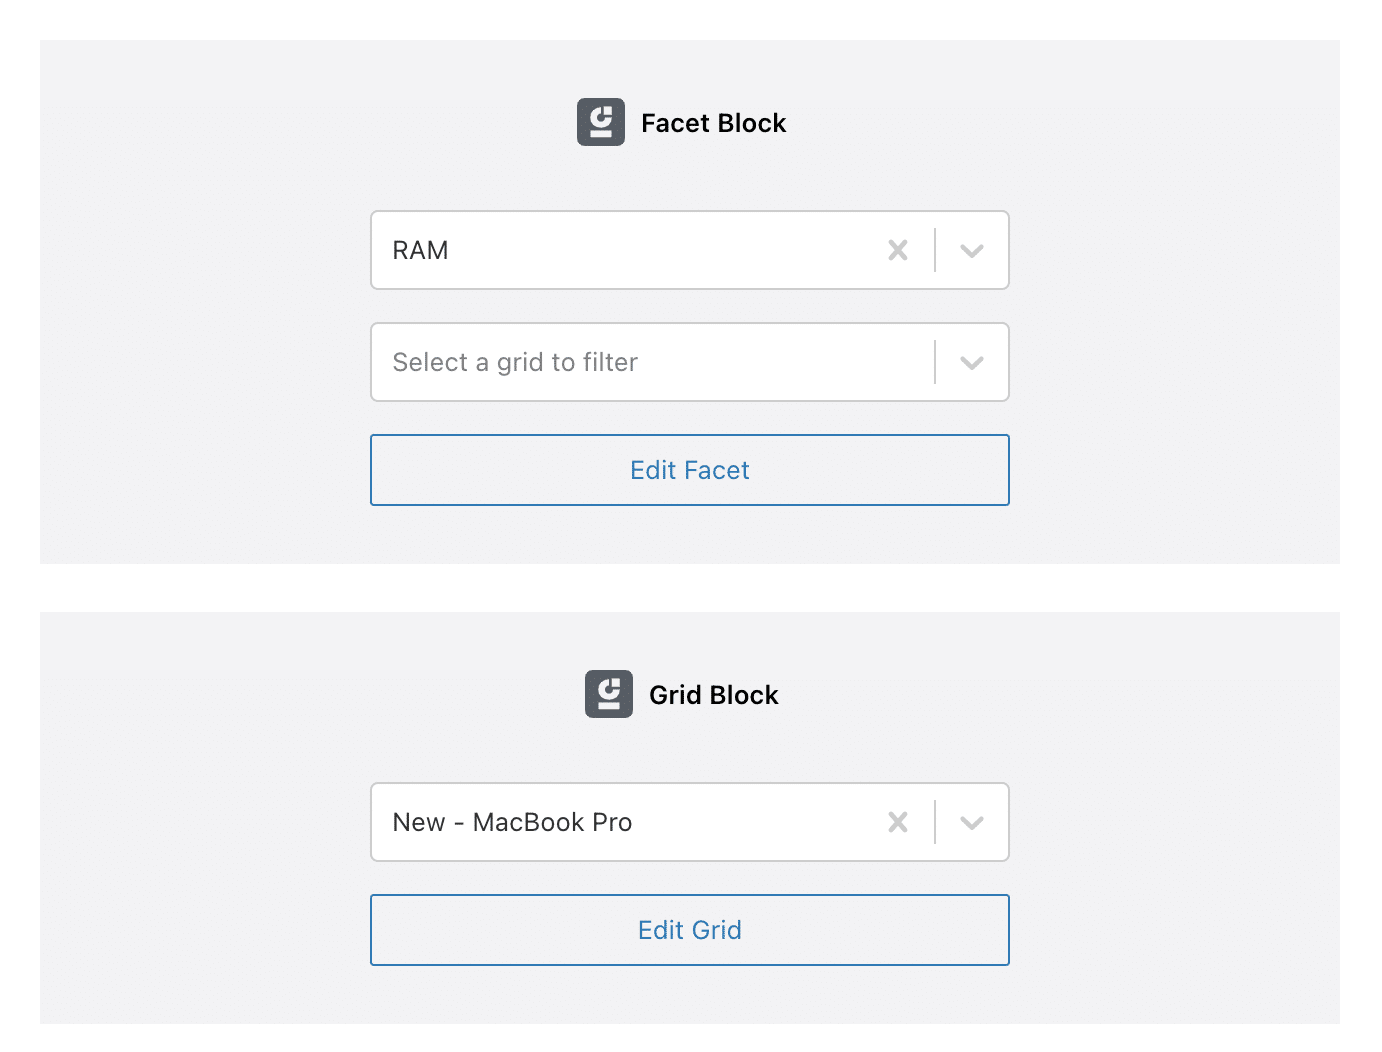 Facet and Grid blocks can be edited in WP Grid Builder in WordPress.